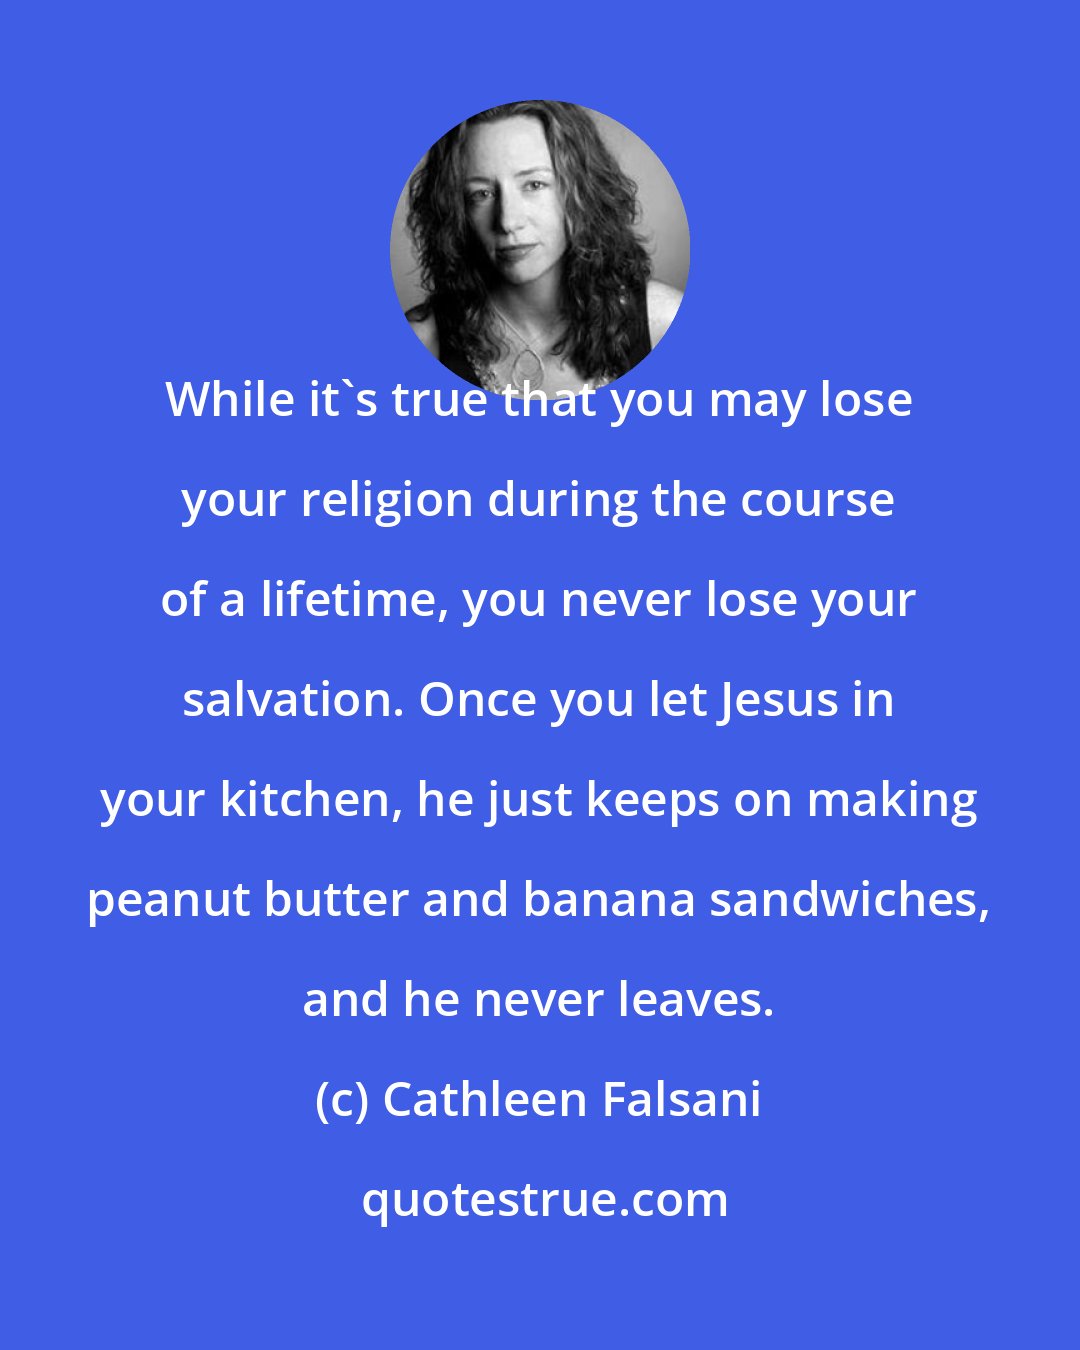 Cathleen Falsani: While it's true that you may lose your religion during the course of a lifetime, you never lose your salvation. Once you let Jesus in your kitchen, he just keeps on making peanut butter and banana sandwiches, and he never leaves.